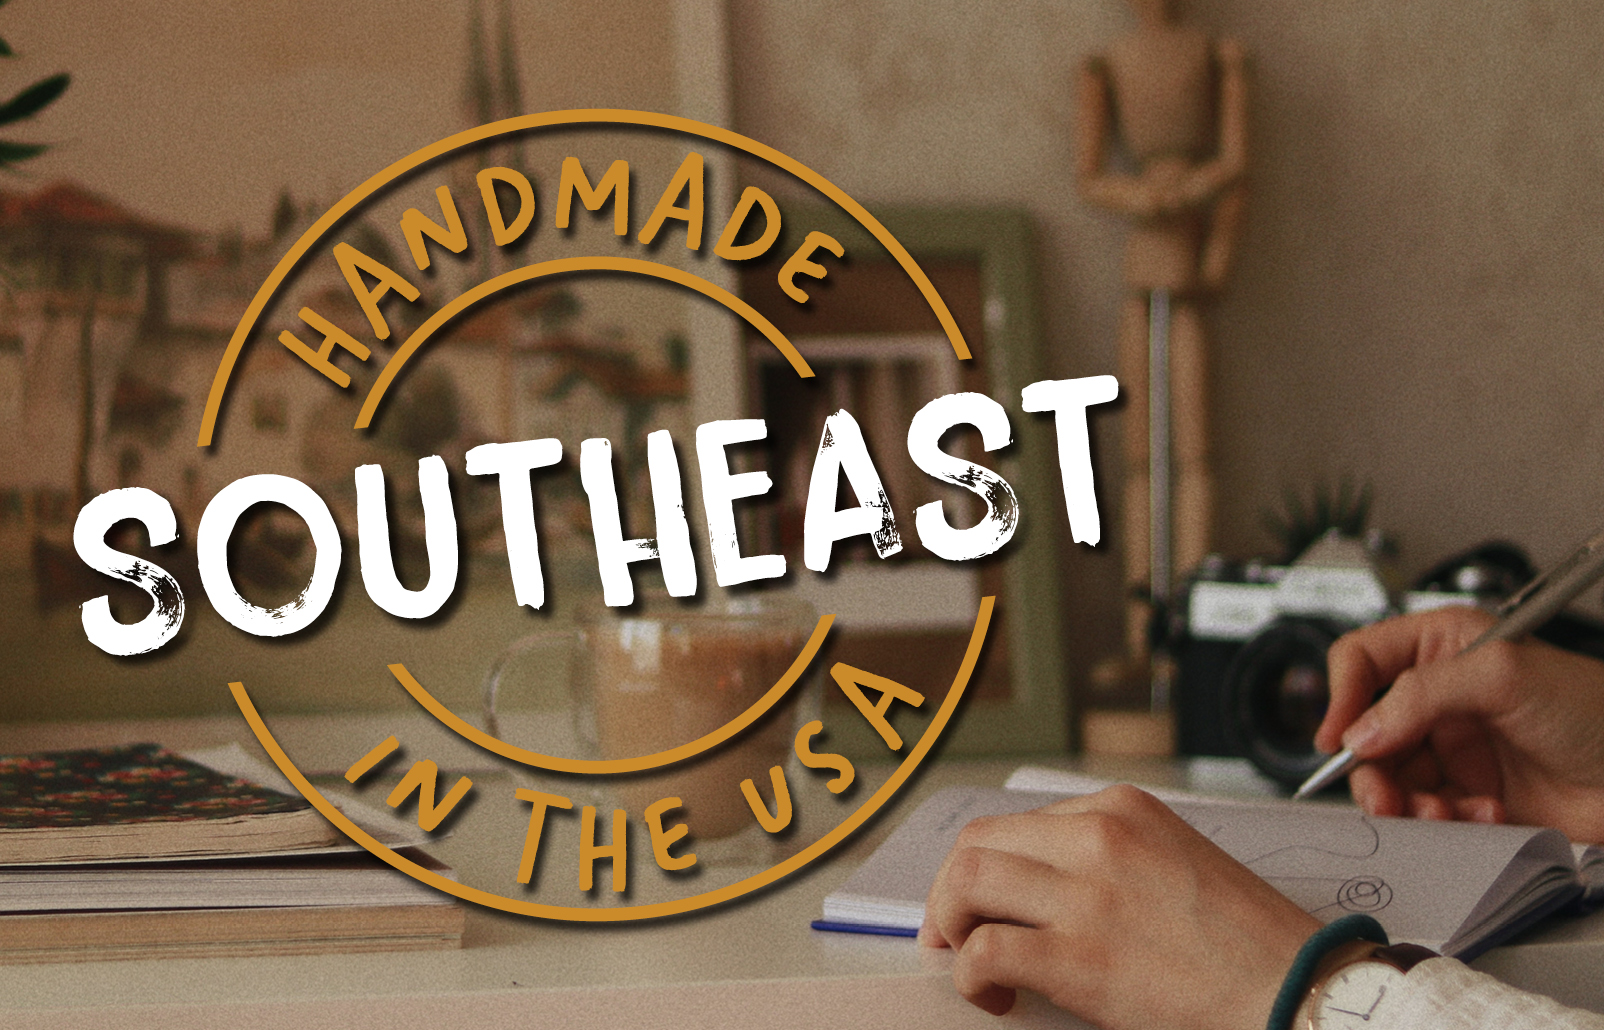 Shop Local: Handmade in the USA